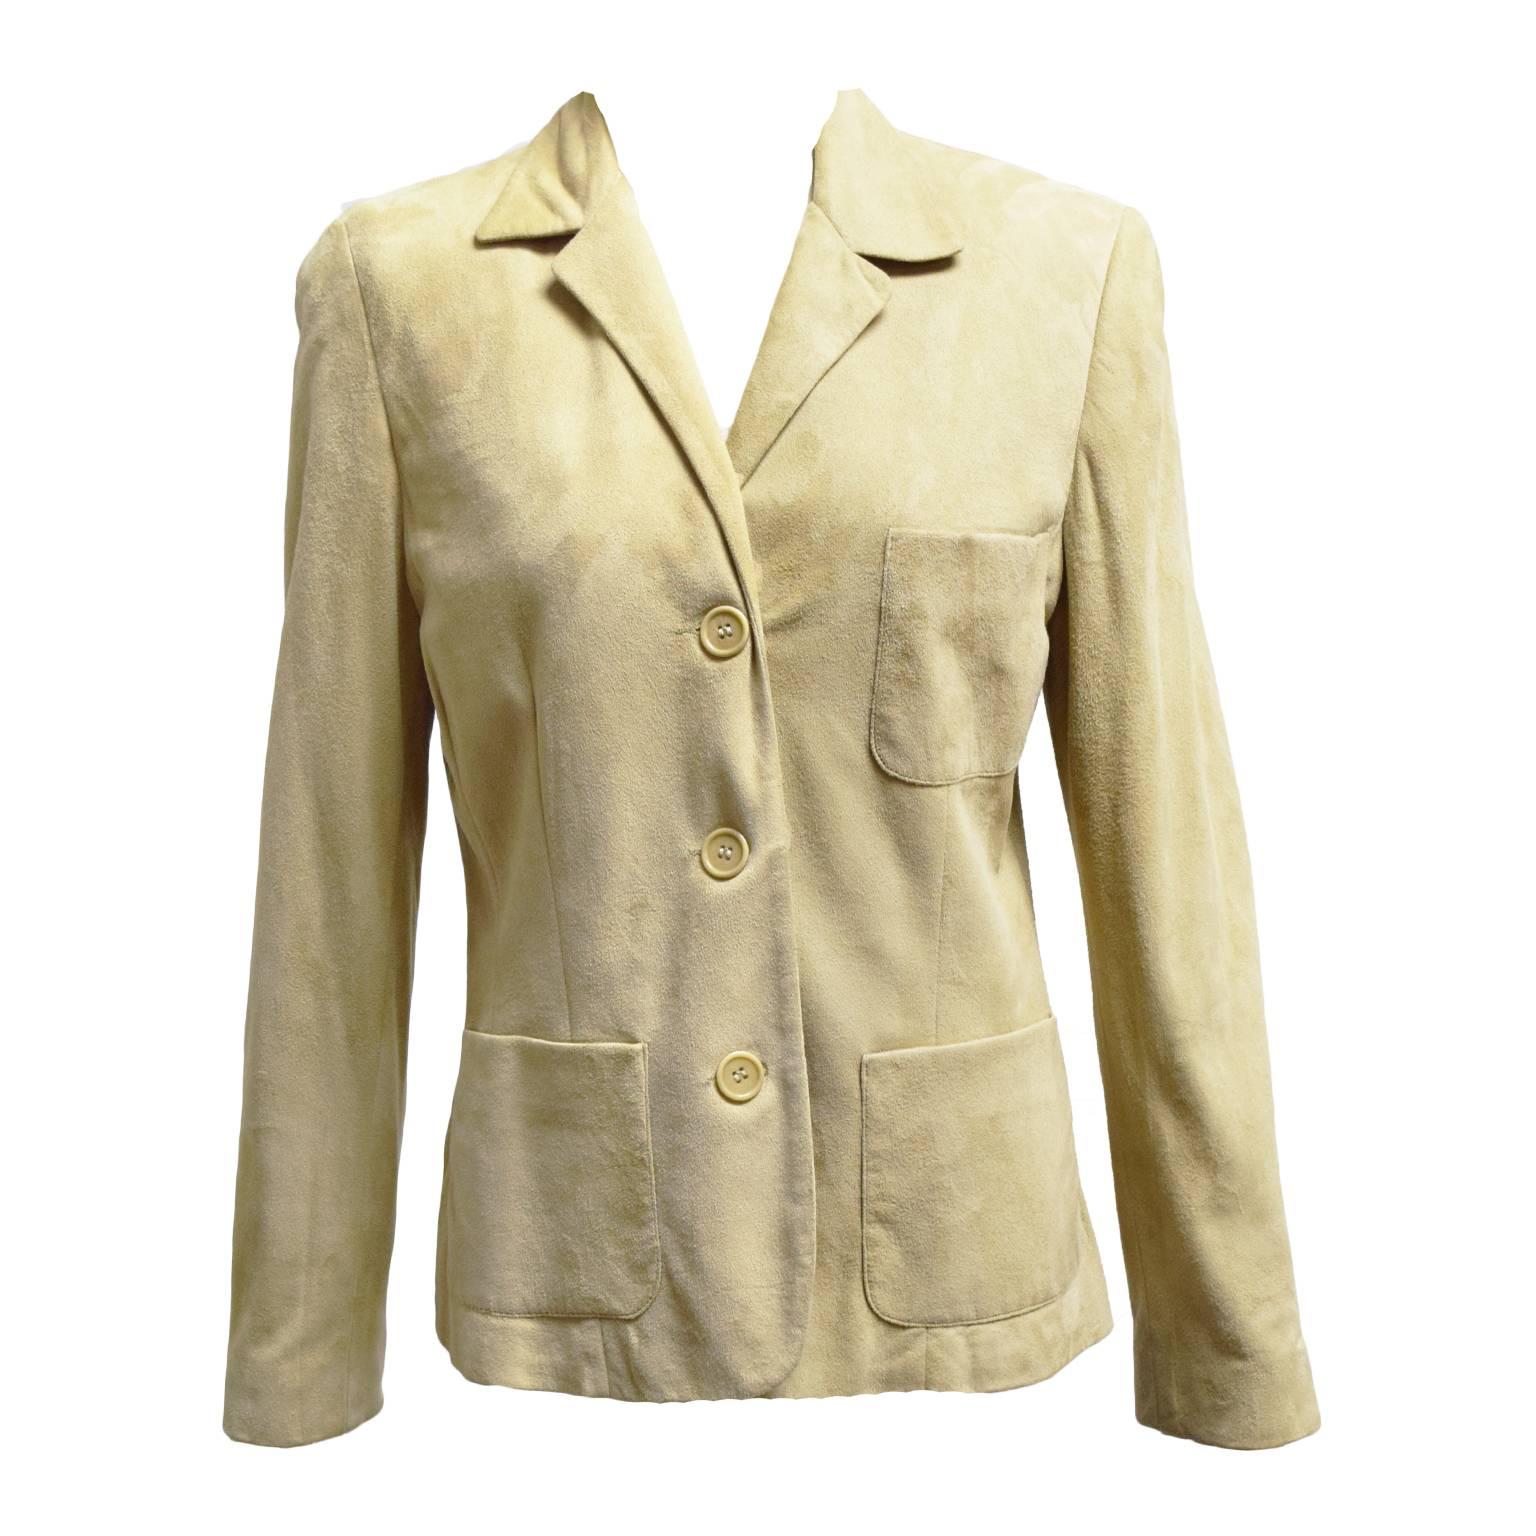 This Ralph Lauren two piece skirt suit is made out of beige brushed suede and is fully lined in silk. The skirt has a back zip and the jacket has frontal pockets and button closures. Great for a fall look. 